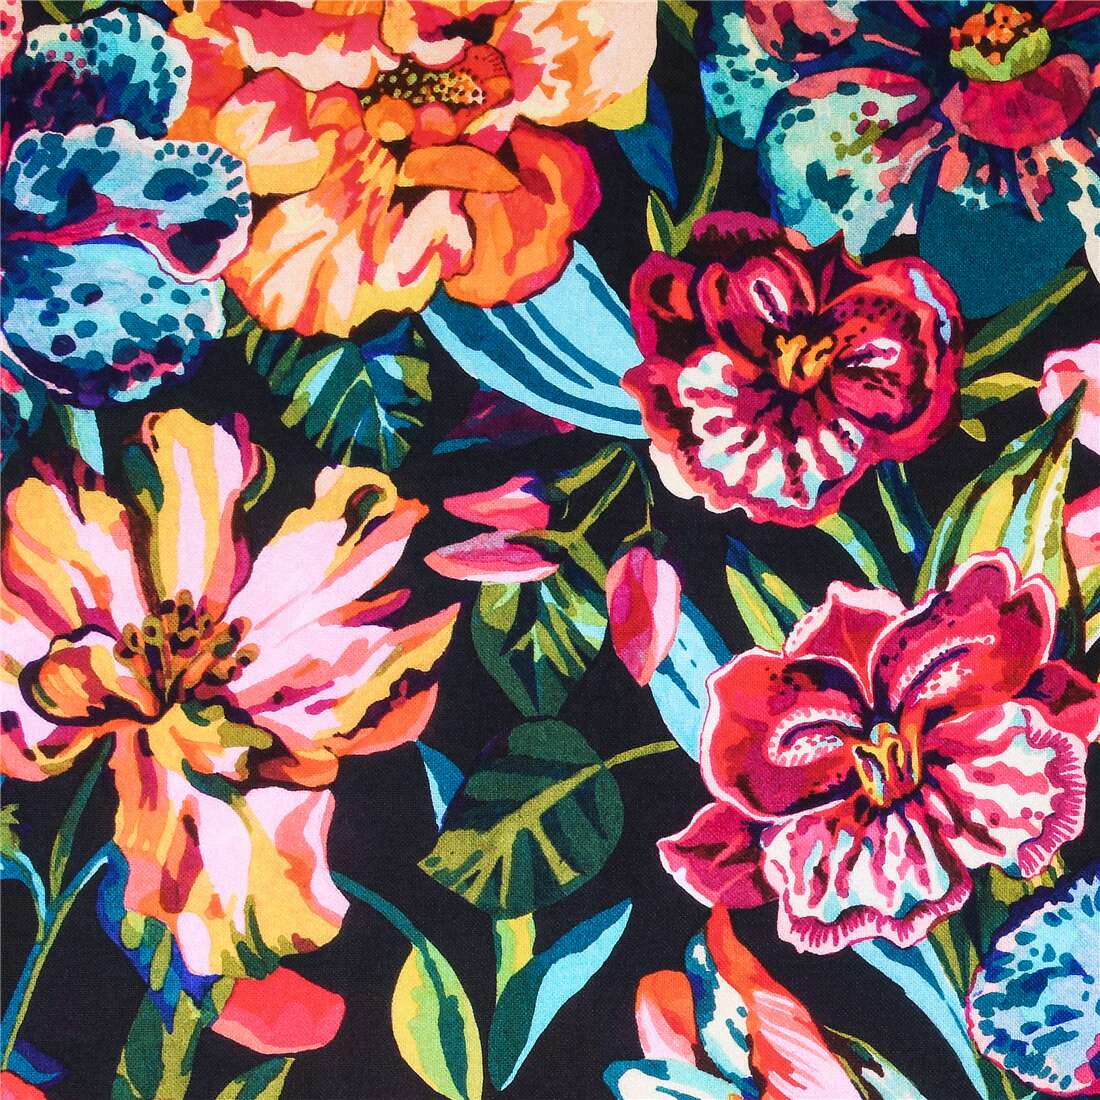 cafetaria vreugde vijand Painted flowers print by Stof France jewel tones cotton fabric - modeS4u